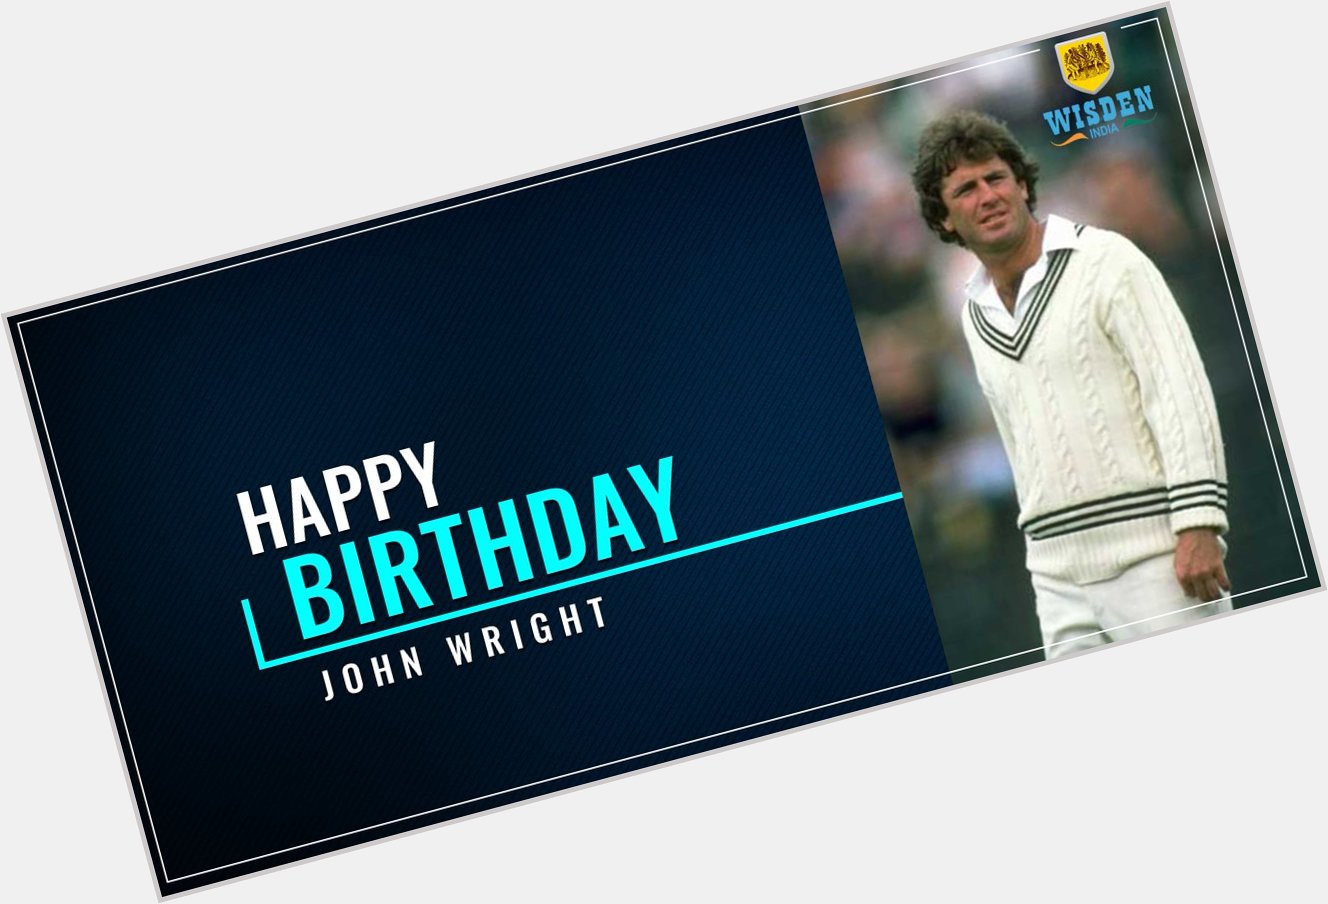 Wishing a very Happy Birthday to the former player & former India coach John Wright! 